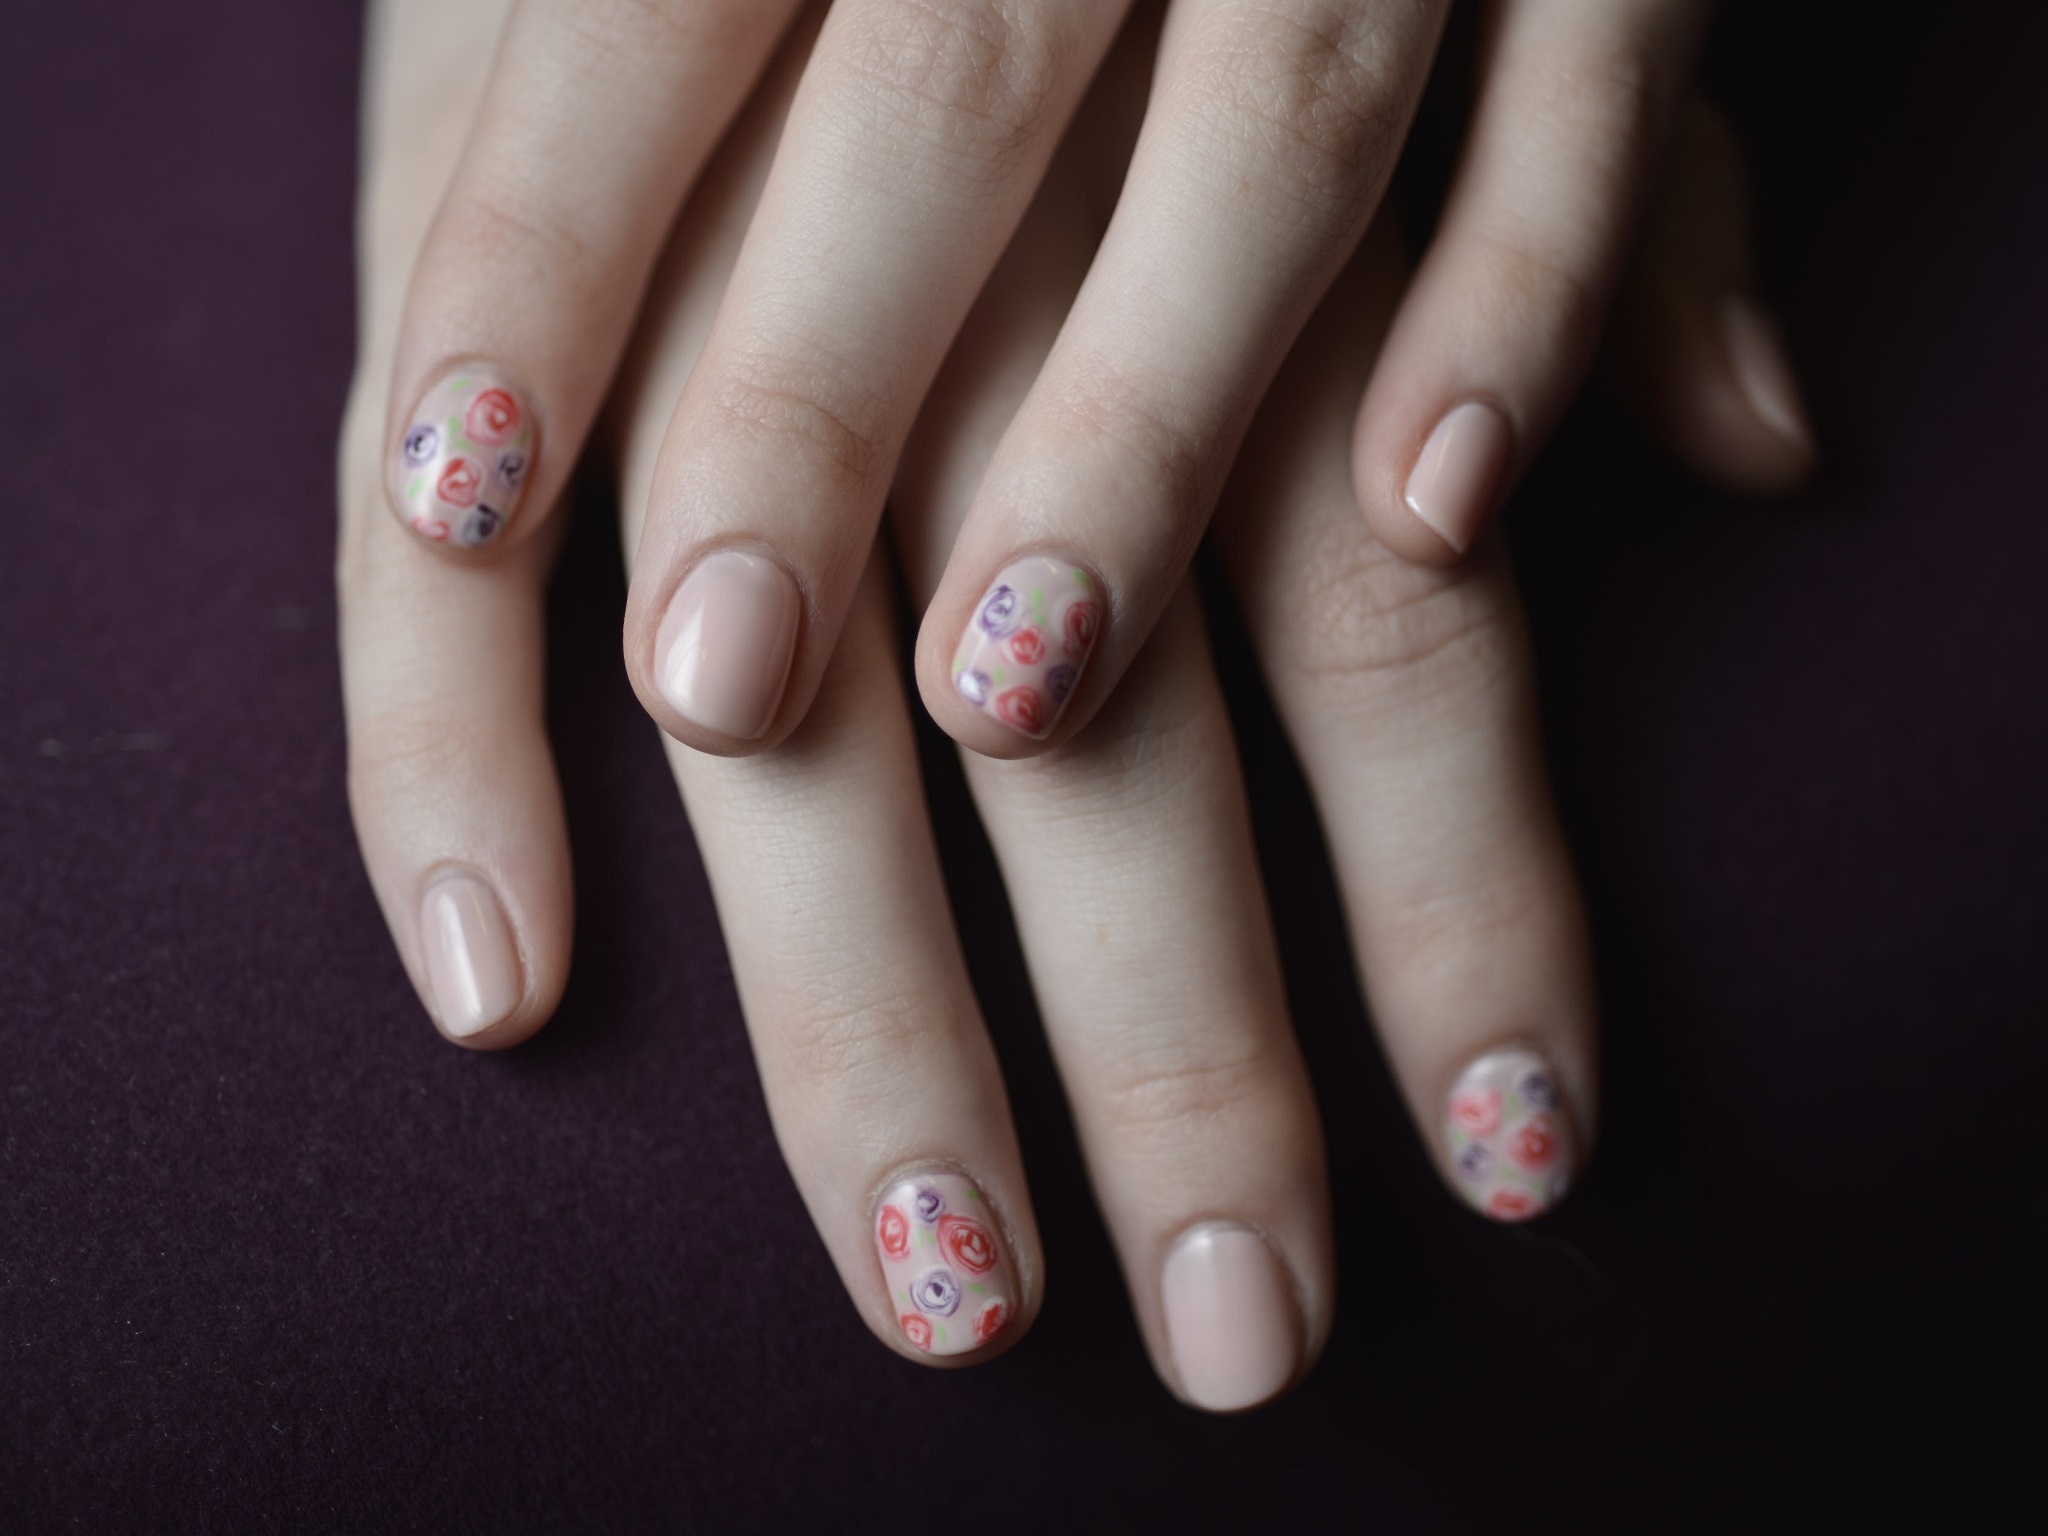 Canary Nail Health And Beauty In Central Hong Kong